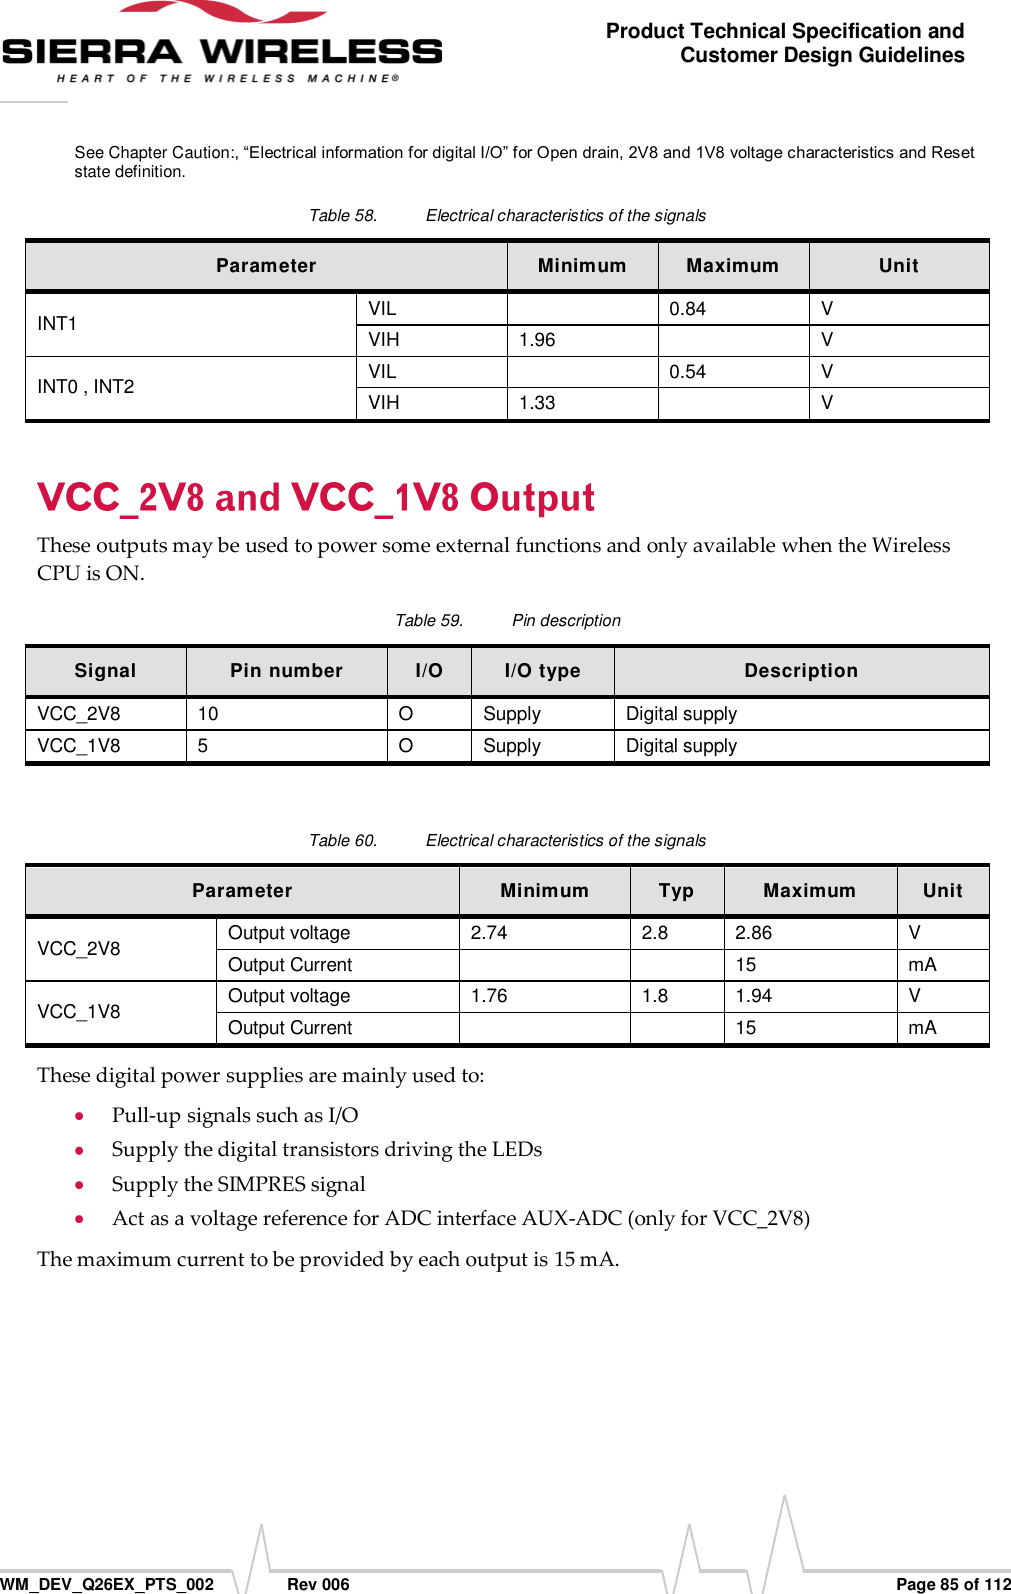      WM_DEV_Q26EX_PTS_002  Rev 006  Page 85 of 112 Product Technical Specification and Customer Design Guidelines See Chapter Caution:, “Electrical information for digital I/O” for Open drain, 2V8 and 1V8 voltage characteristics and Reset state definition. Table 58.  Electrical characteristics of the signals Parameter Minimum Maximum Unit INT1 VIL  0.84 V VIH 1.96  V INT0 , INT2 VIL  0.54 V VIH 1.33  V These outputs may be used to power some external functions and only available when the Wireless CPU is ON. Table 59.  Pin description Signal Pin number I/O I/O type Description VCC_2V8 10 O Supply Digital supply VCC_1V8 5 O Supply Digital supply  Table 60.  Electrical characteristics of the signals Parameter Minimum Typ Maximum Unit VCC_2V8 Output voltage 2.74 2.8 2.86 V Output Current   15 mA VCC_1V8 Output voltage 1.76 1.8 1.94 V Output Current   15 mA These digital power supplies are mainly used to:  Pull-up signals such as I/O  Supply the digital transistors driving the LEDs  Supply the SIMPRES signal  Act as a voltage reference for ADC interface AUX-ADC (only for VCC_2V8) The maximum current to be provided by each output is 15 mA.  